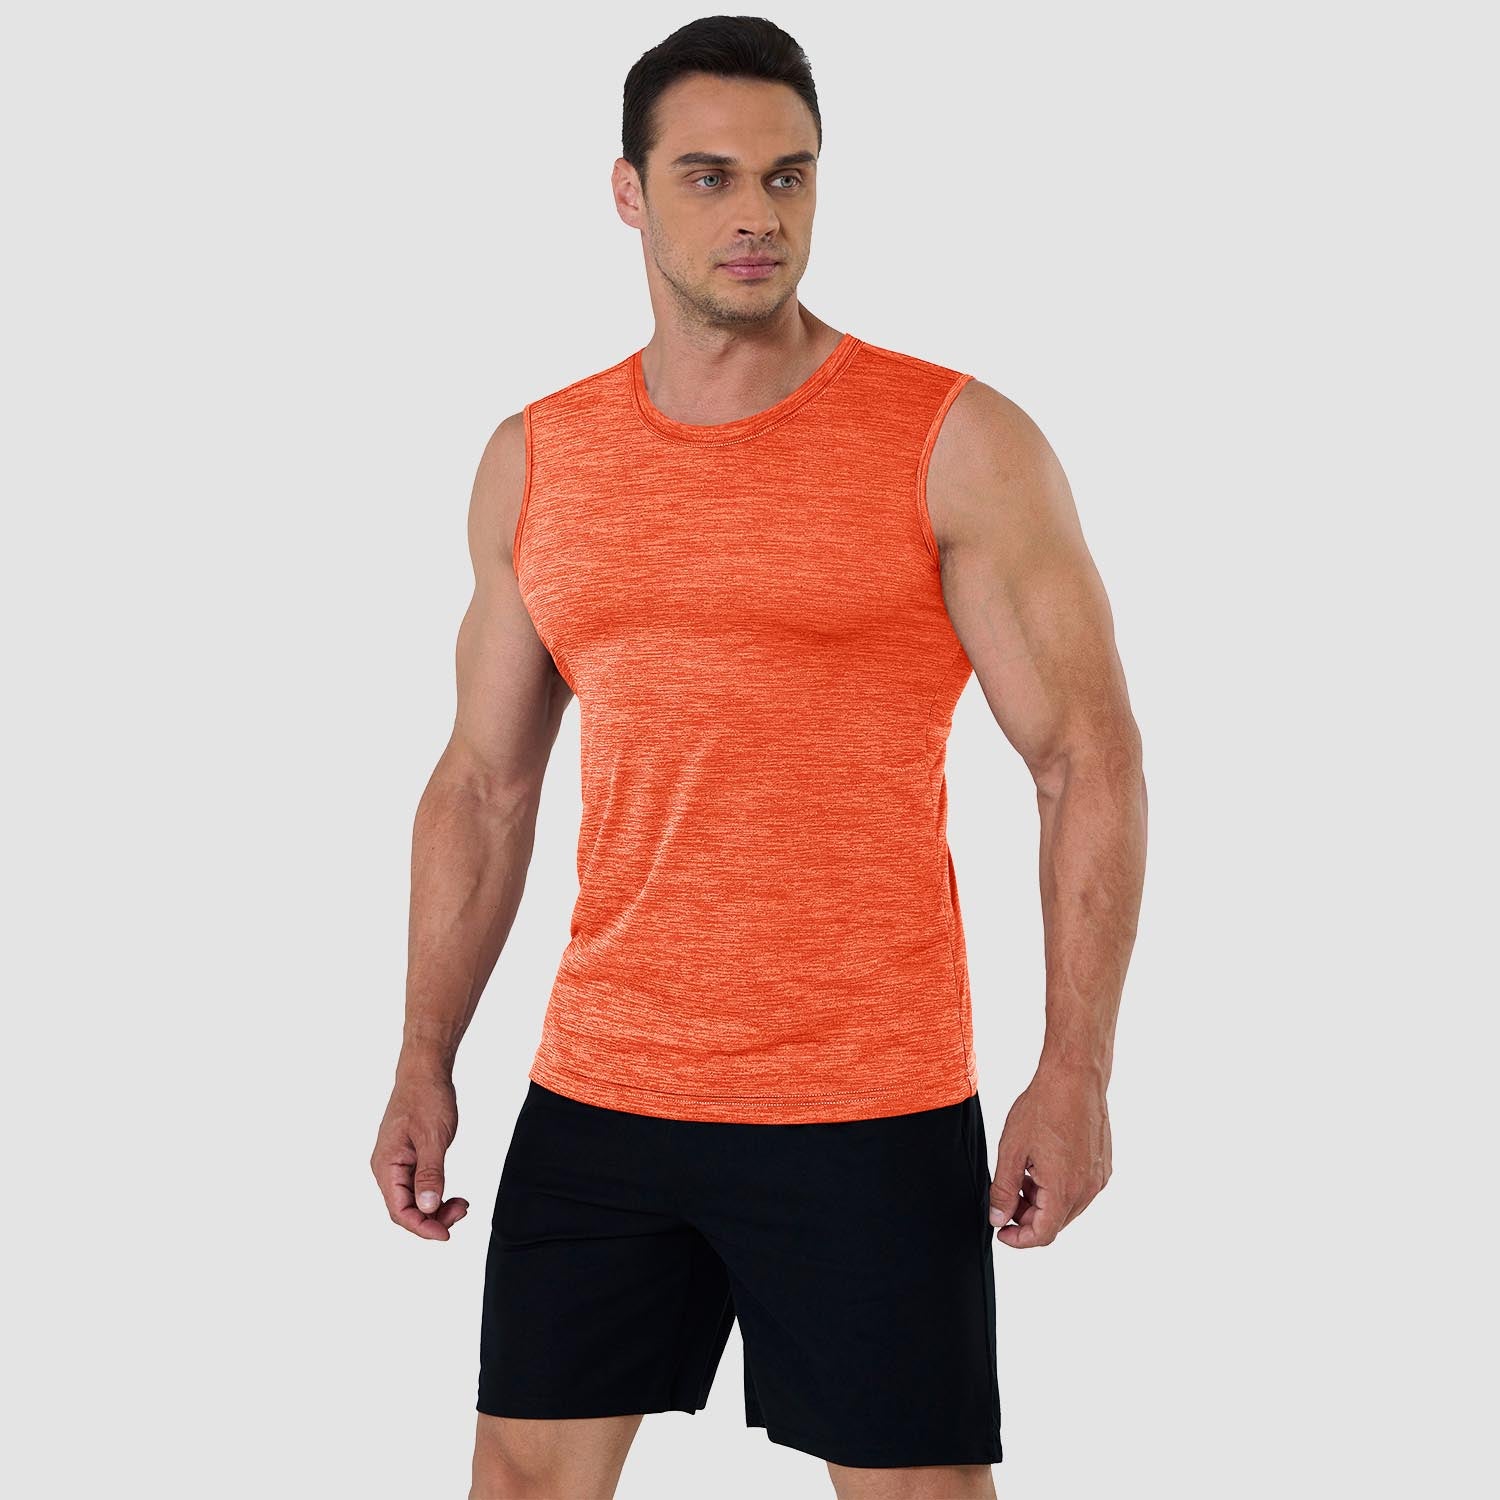 Men's Tank Tops Quick Dry Sleeveless Shirts Muscle Shirts Workout Gym